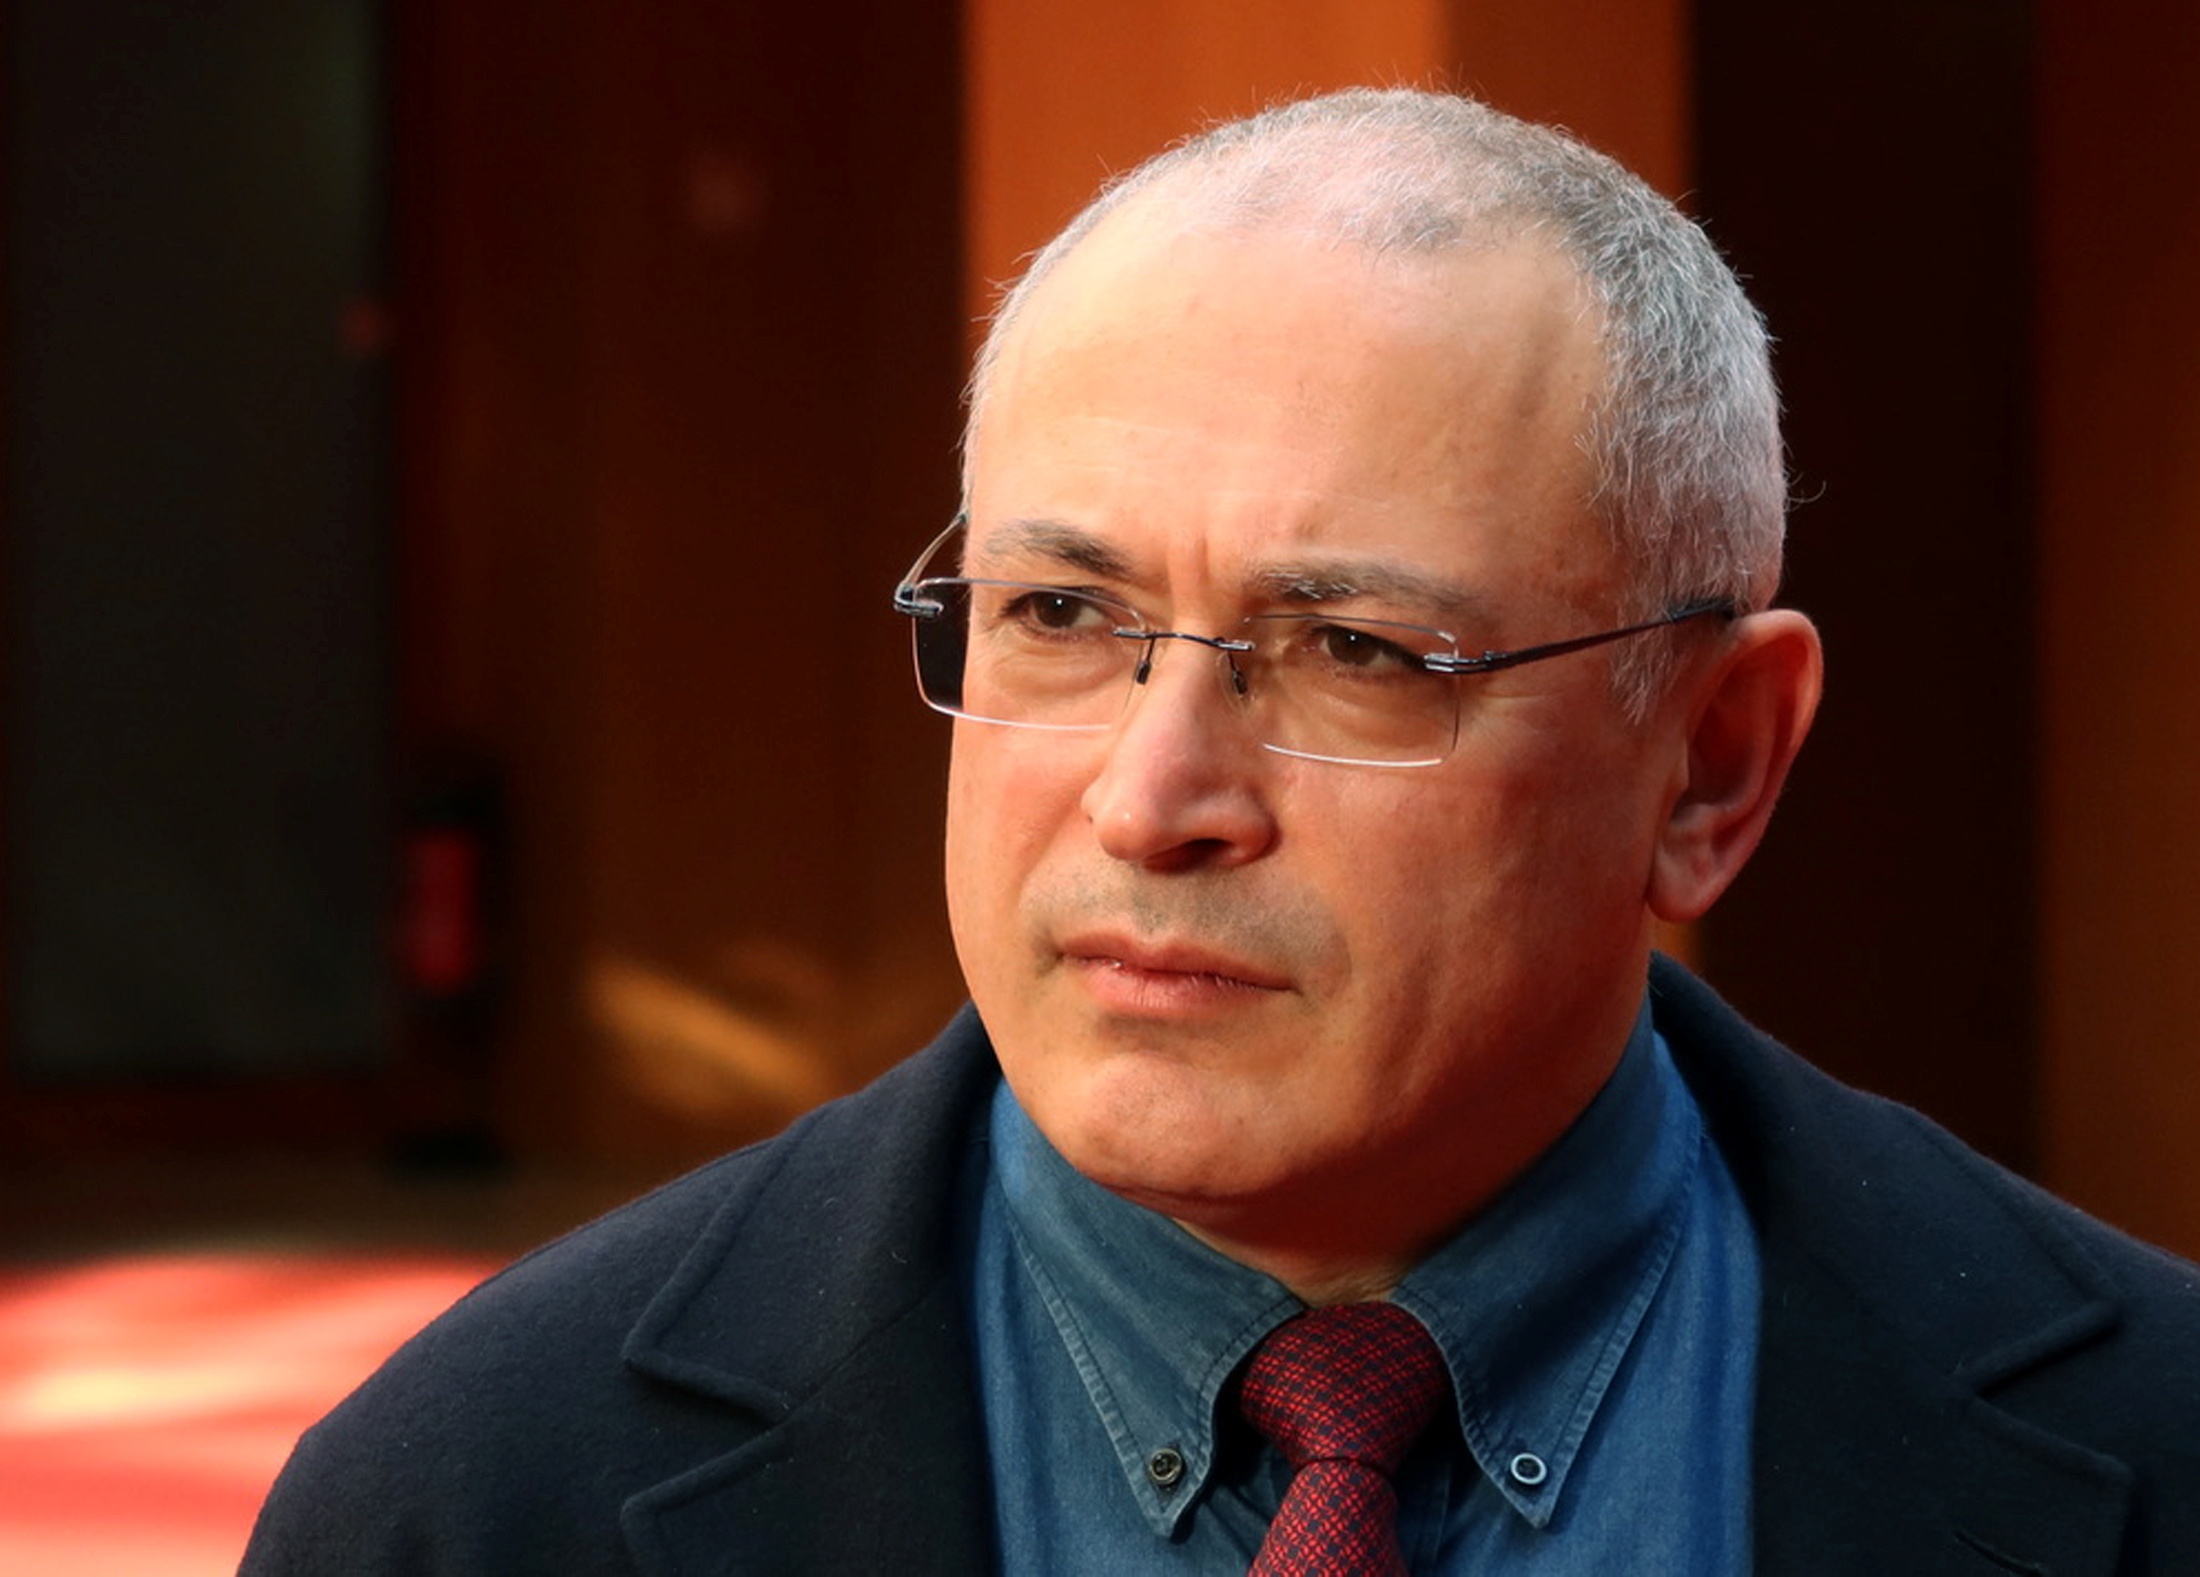 Exiled opposition activist Mikhail Khodorkovsky answers questions during a Reuters Interview in Berlin